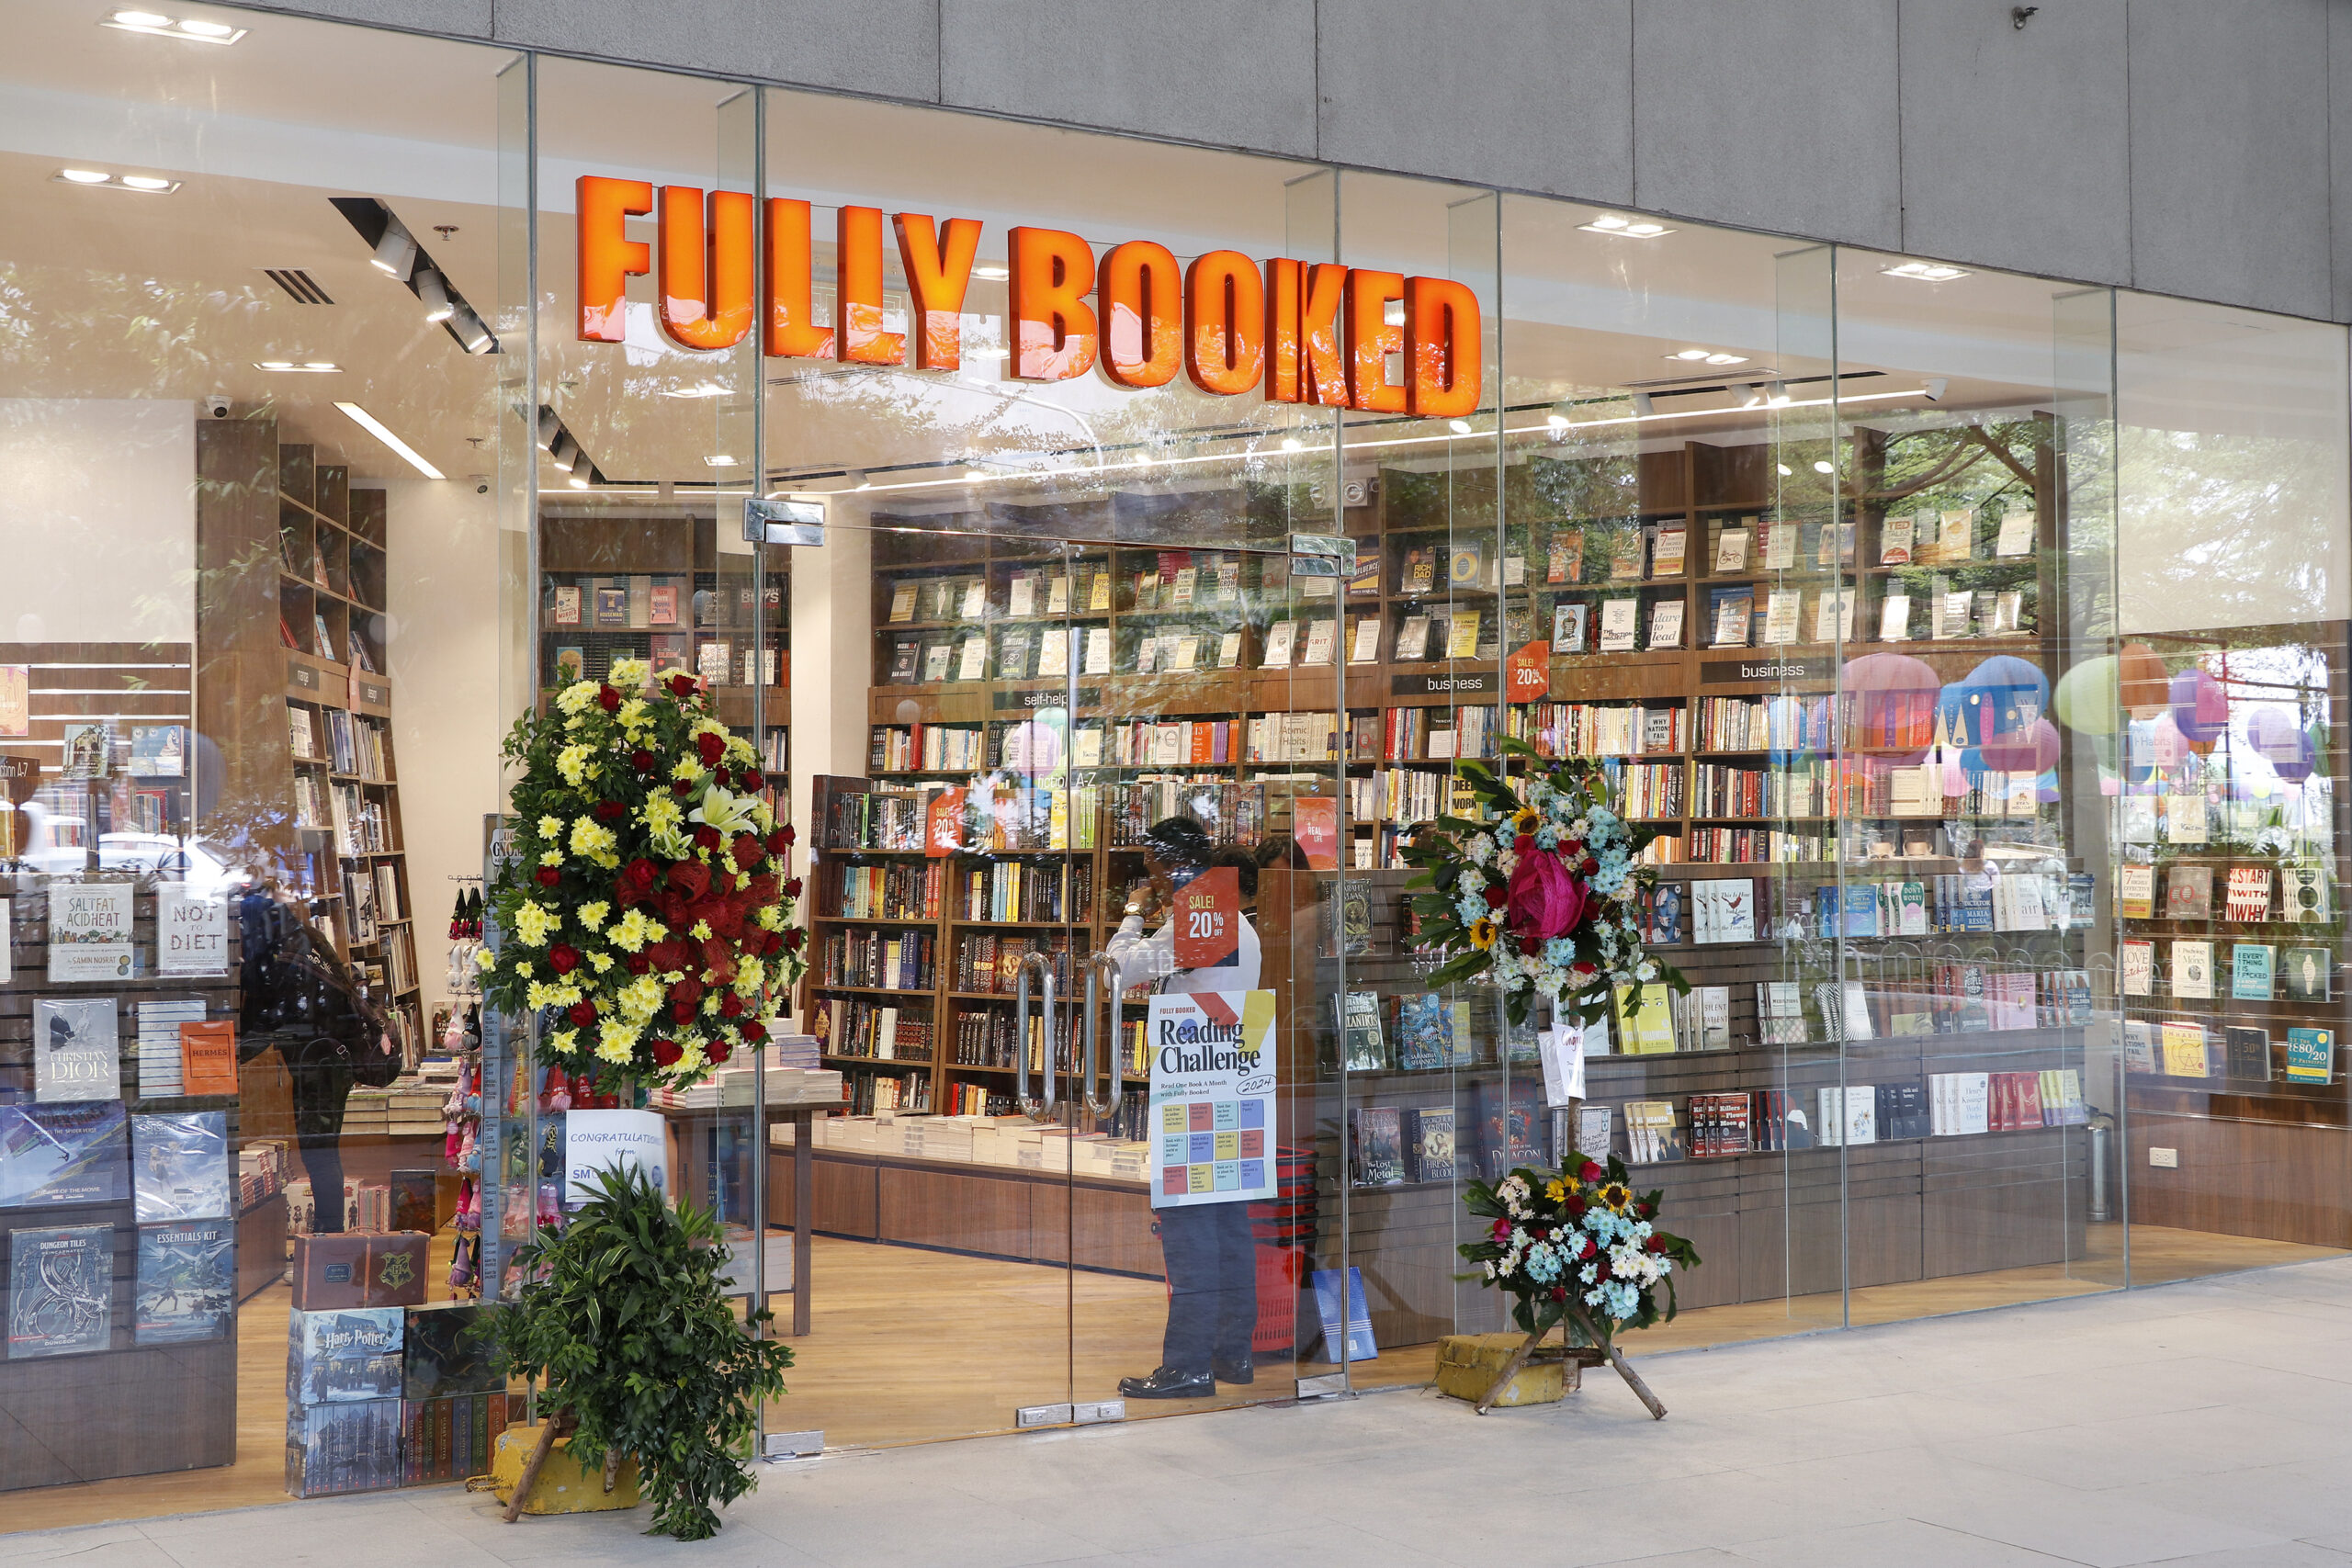 IN PHOTOS: Fully Booked Opens a Bigger Store in Iloilo